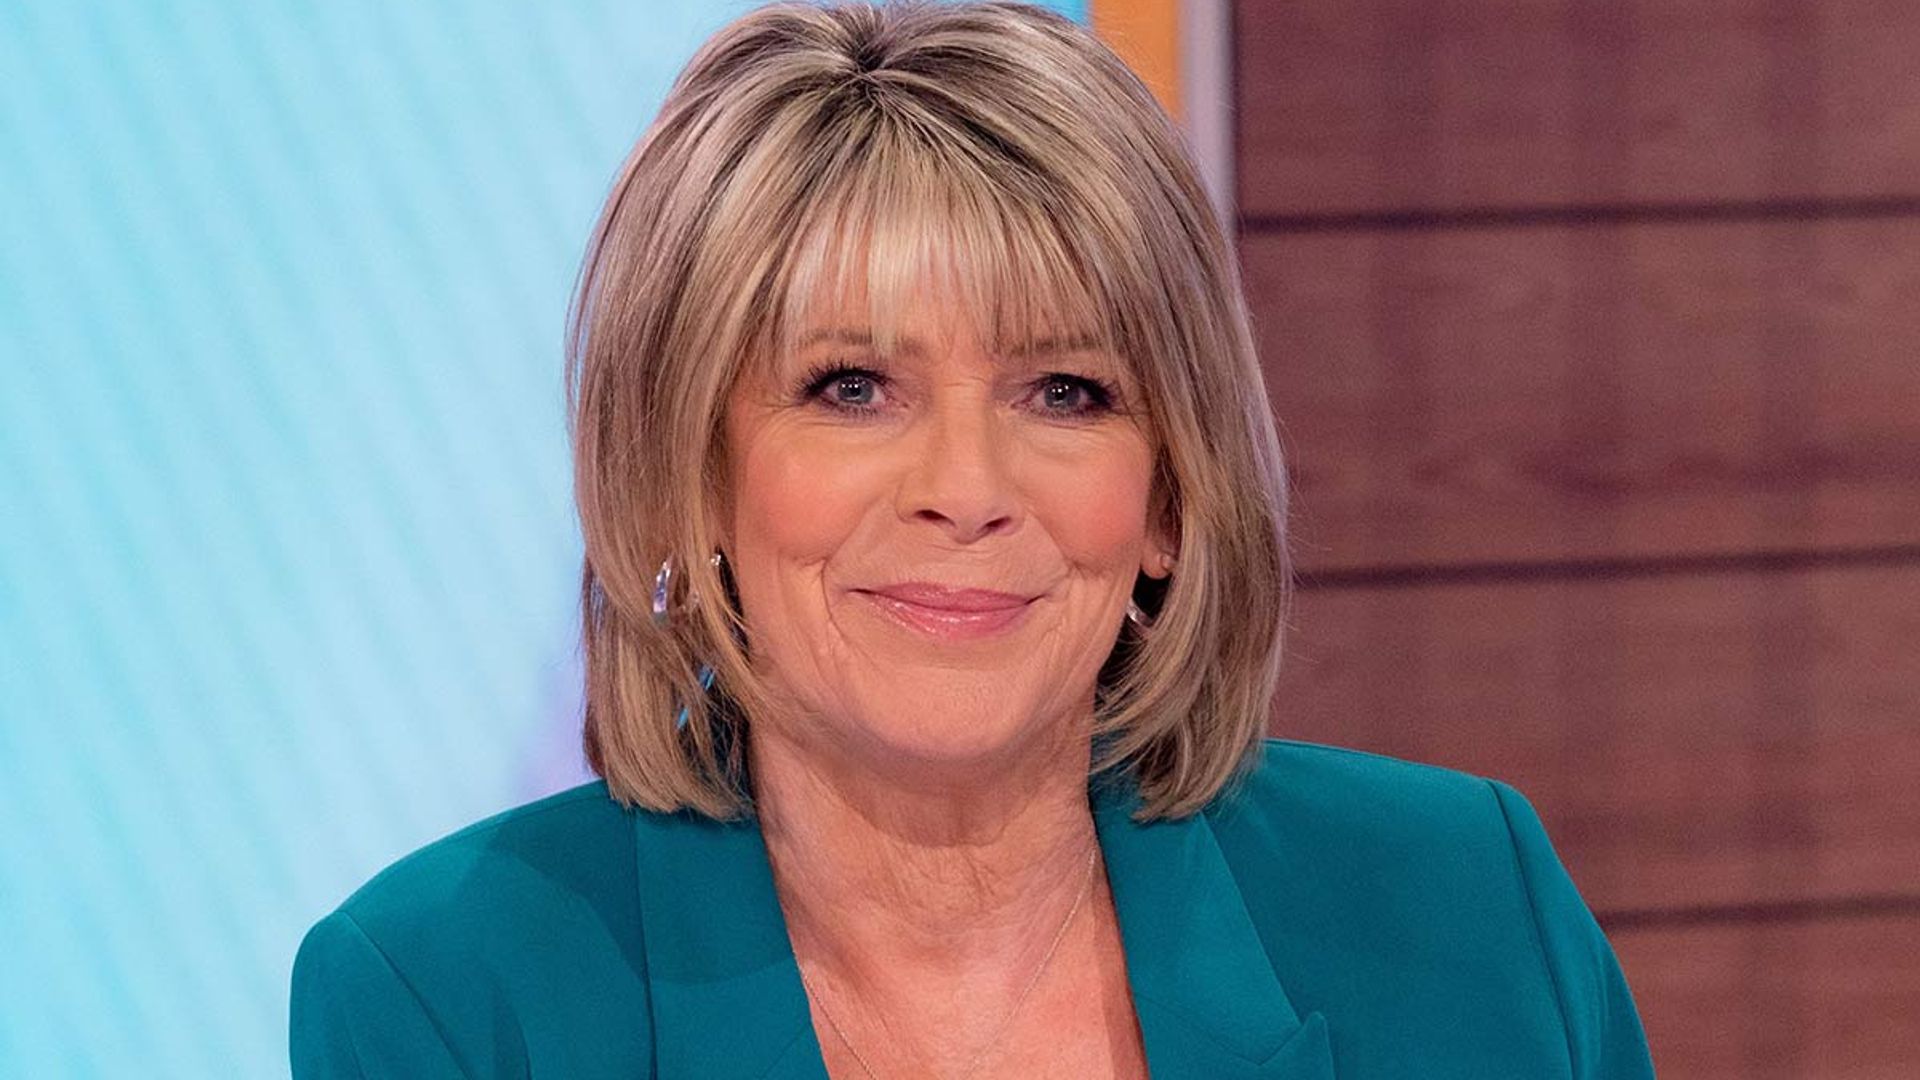 Ruth Langsford’s hair hack is a game-changer for treating split ends